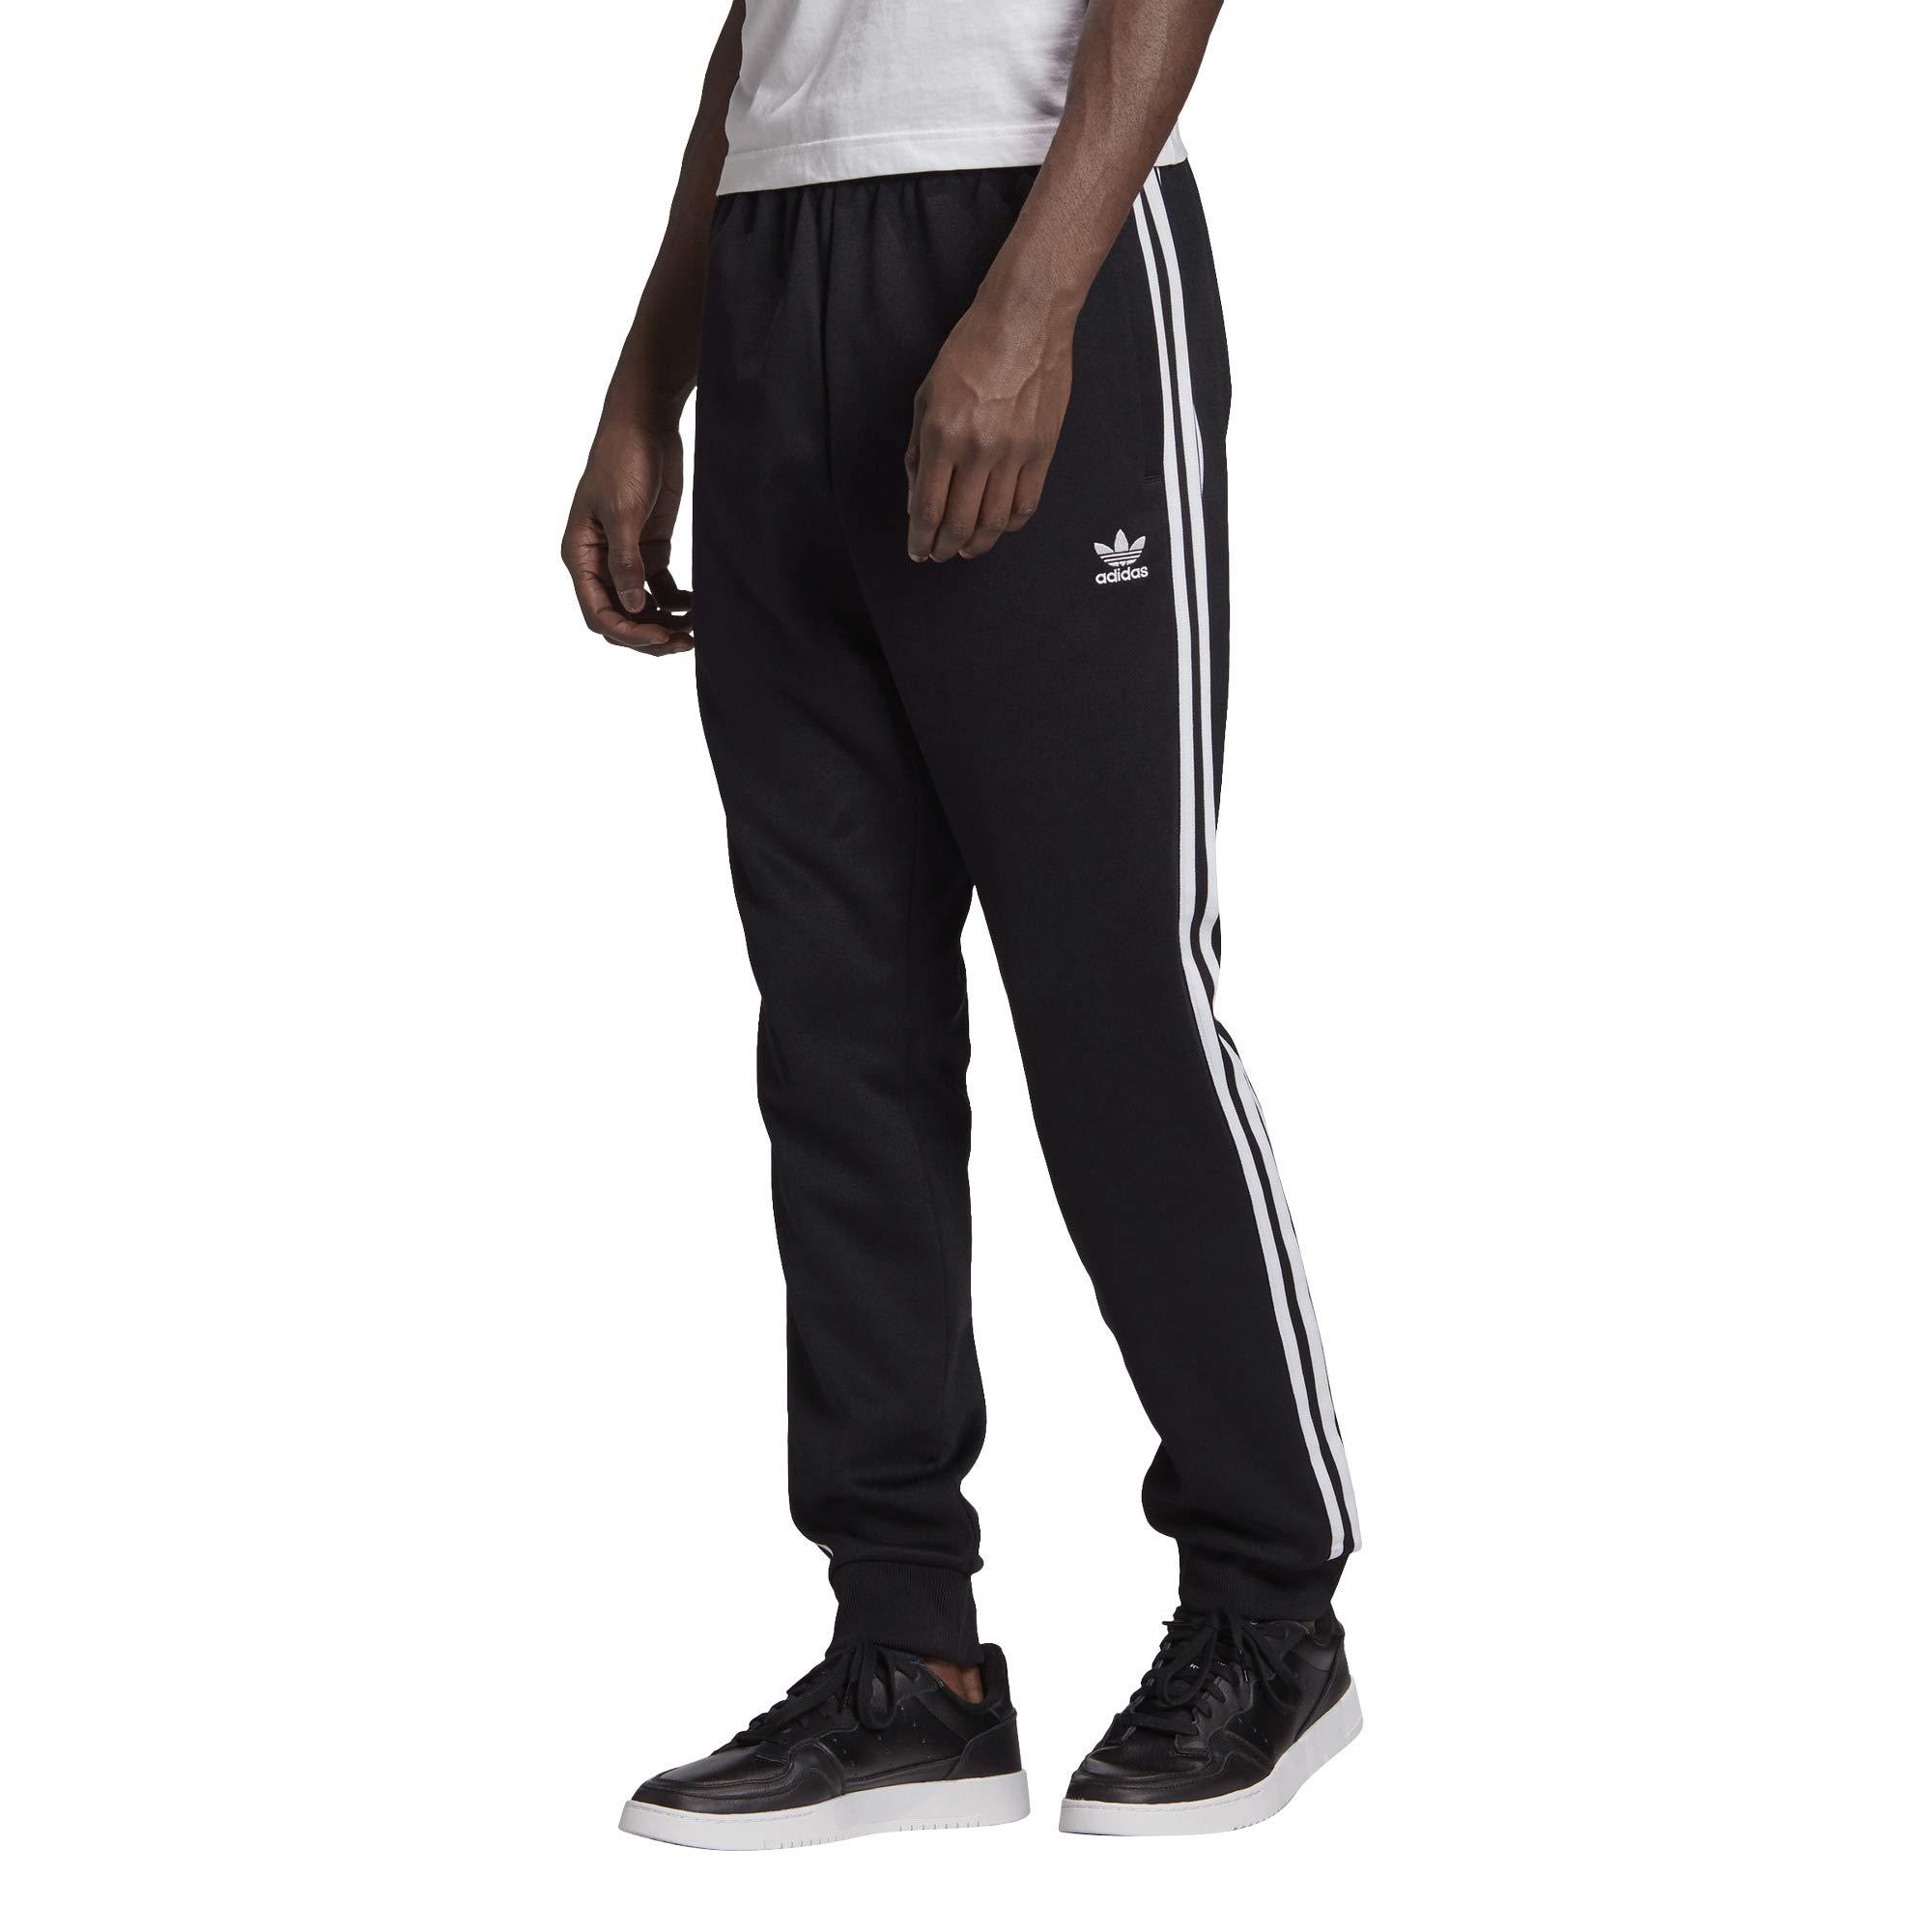 adidas Originals Synthetic Superstar Track Pants in Black for Men - Lyst